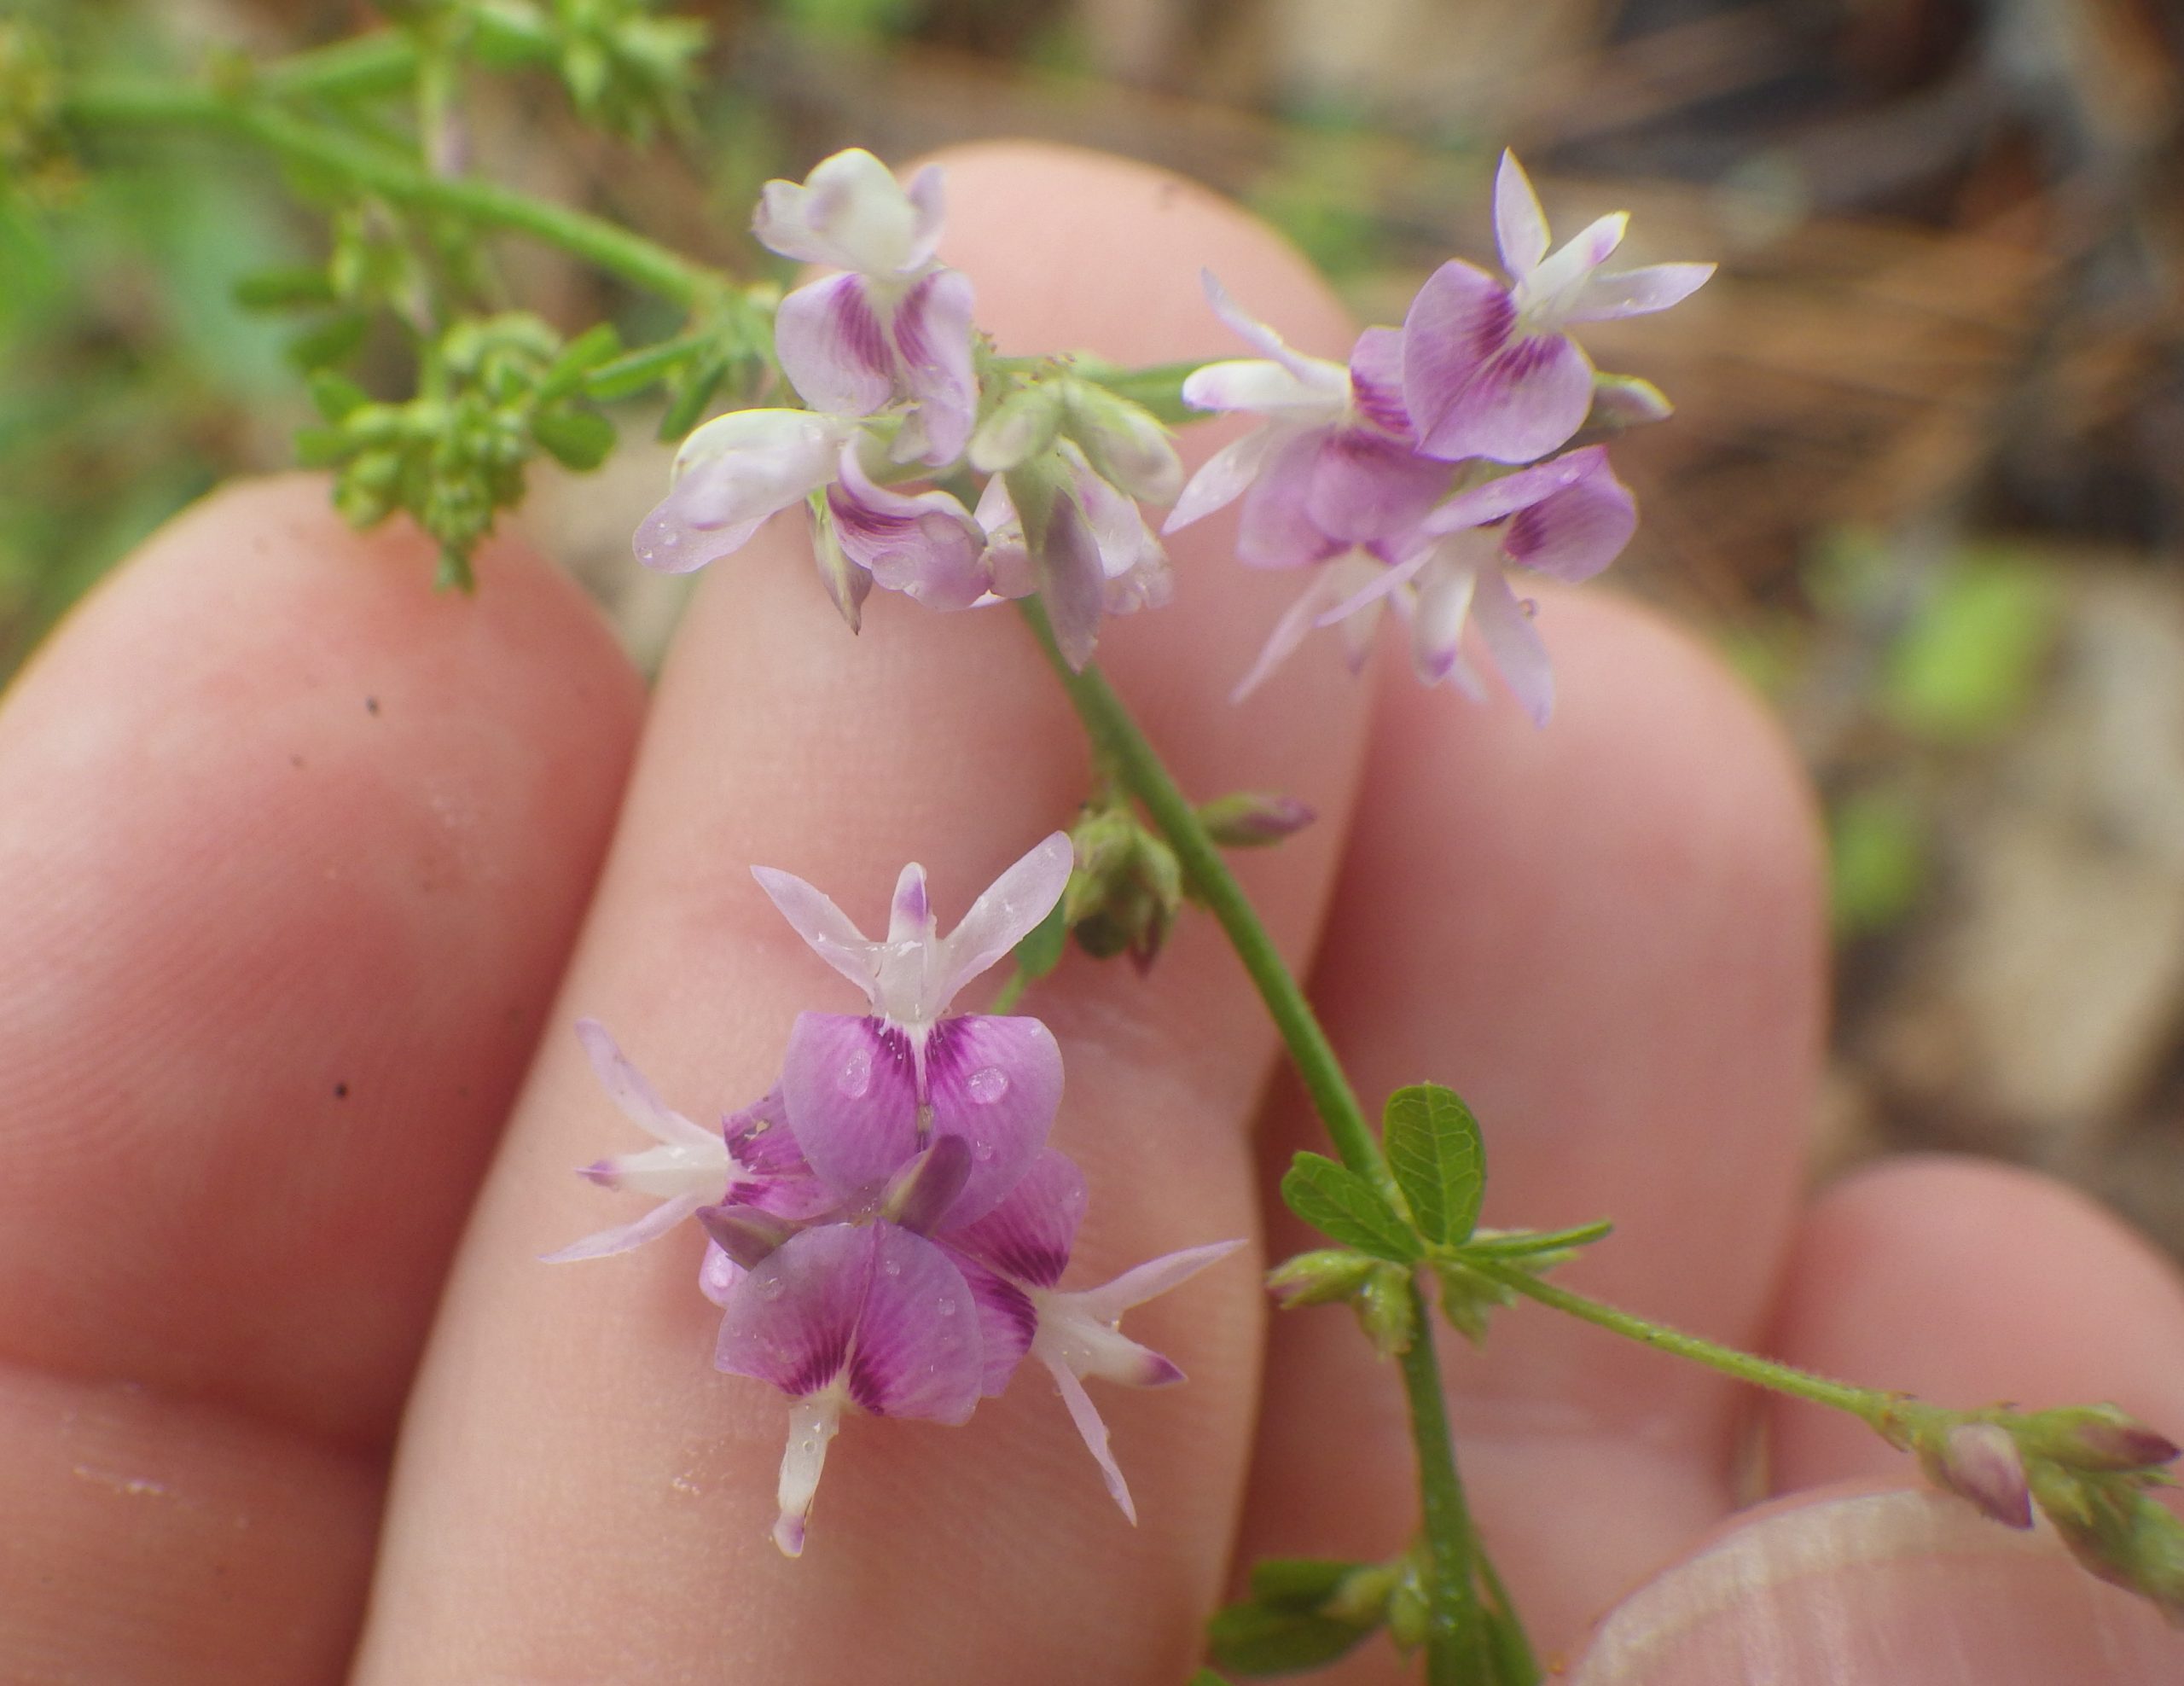 purple and white pea flowers held in hand